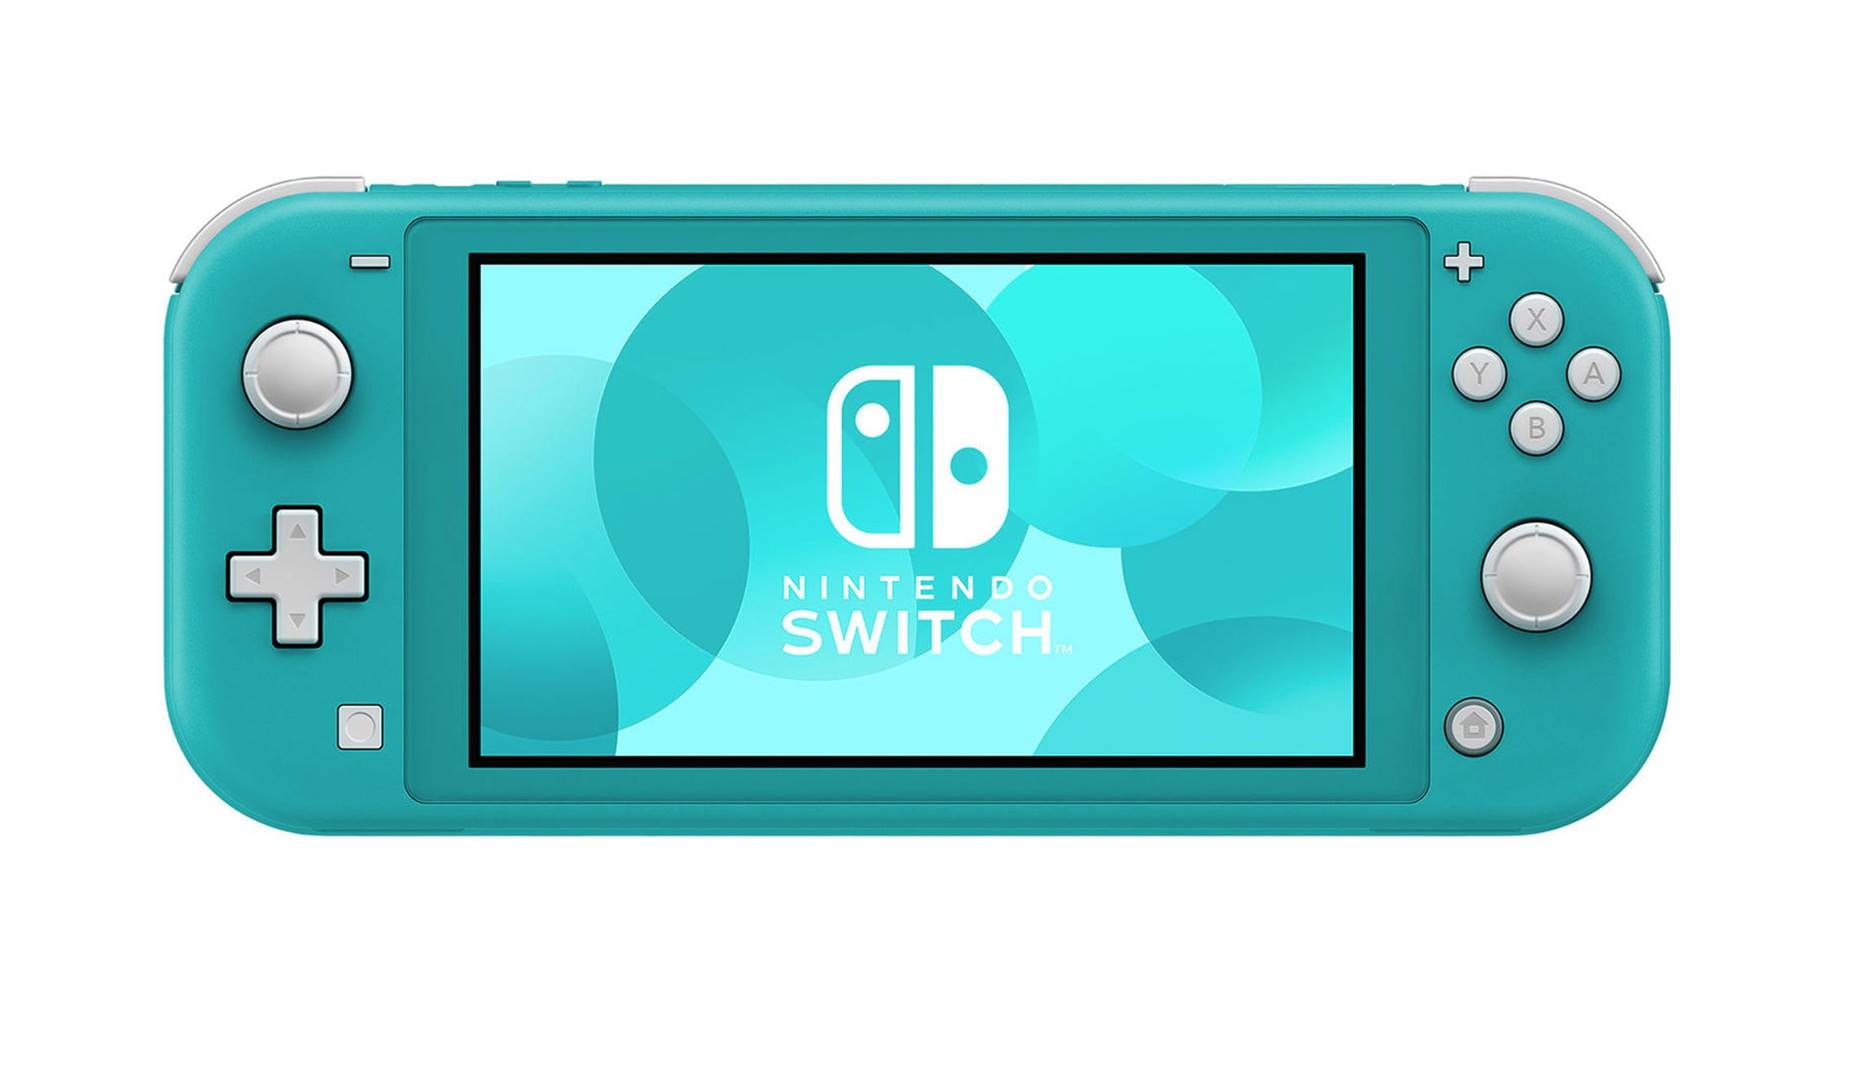 Nintendo switch lite available in an eye-catching turquoise shade. Picture: Supplied